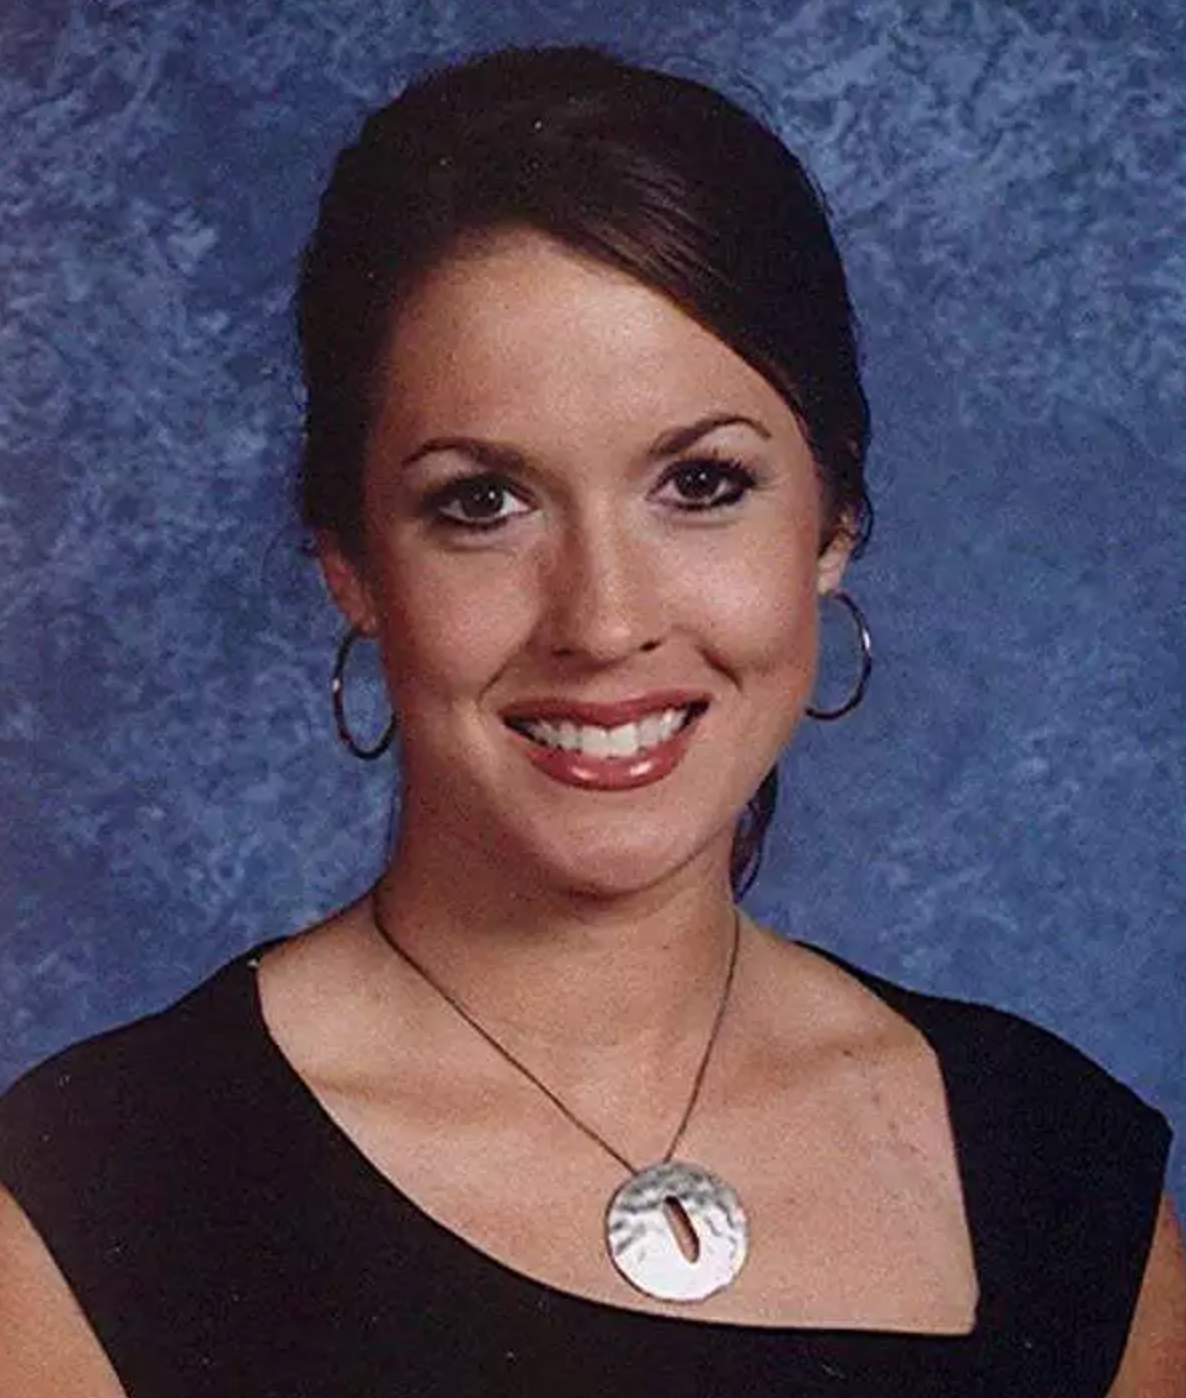 The body of former beauty queen Tara Grinstead has never been located